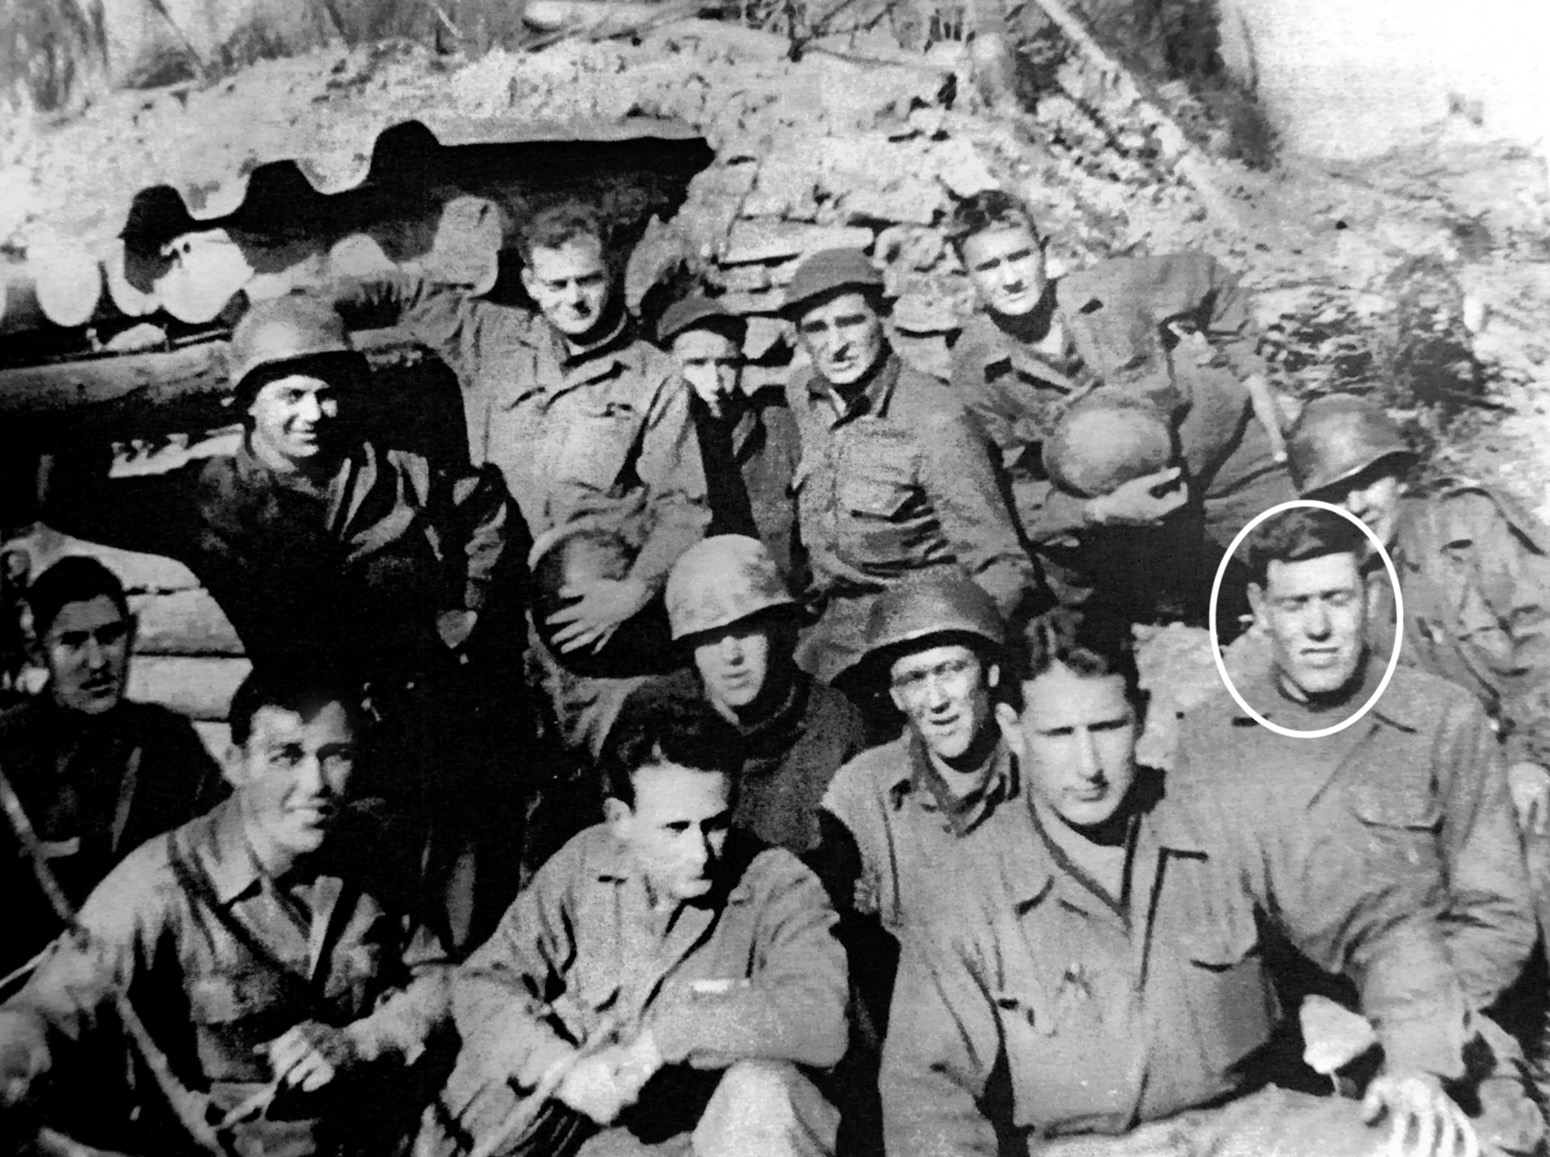 Clarence “Monty” Rincker (lower right, circled) and his 81mm mortar squad, photographed in February 1945 near the Maginot Line. 